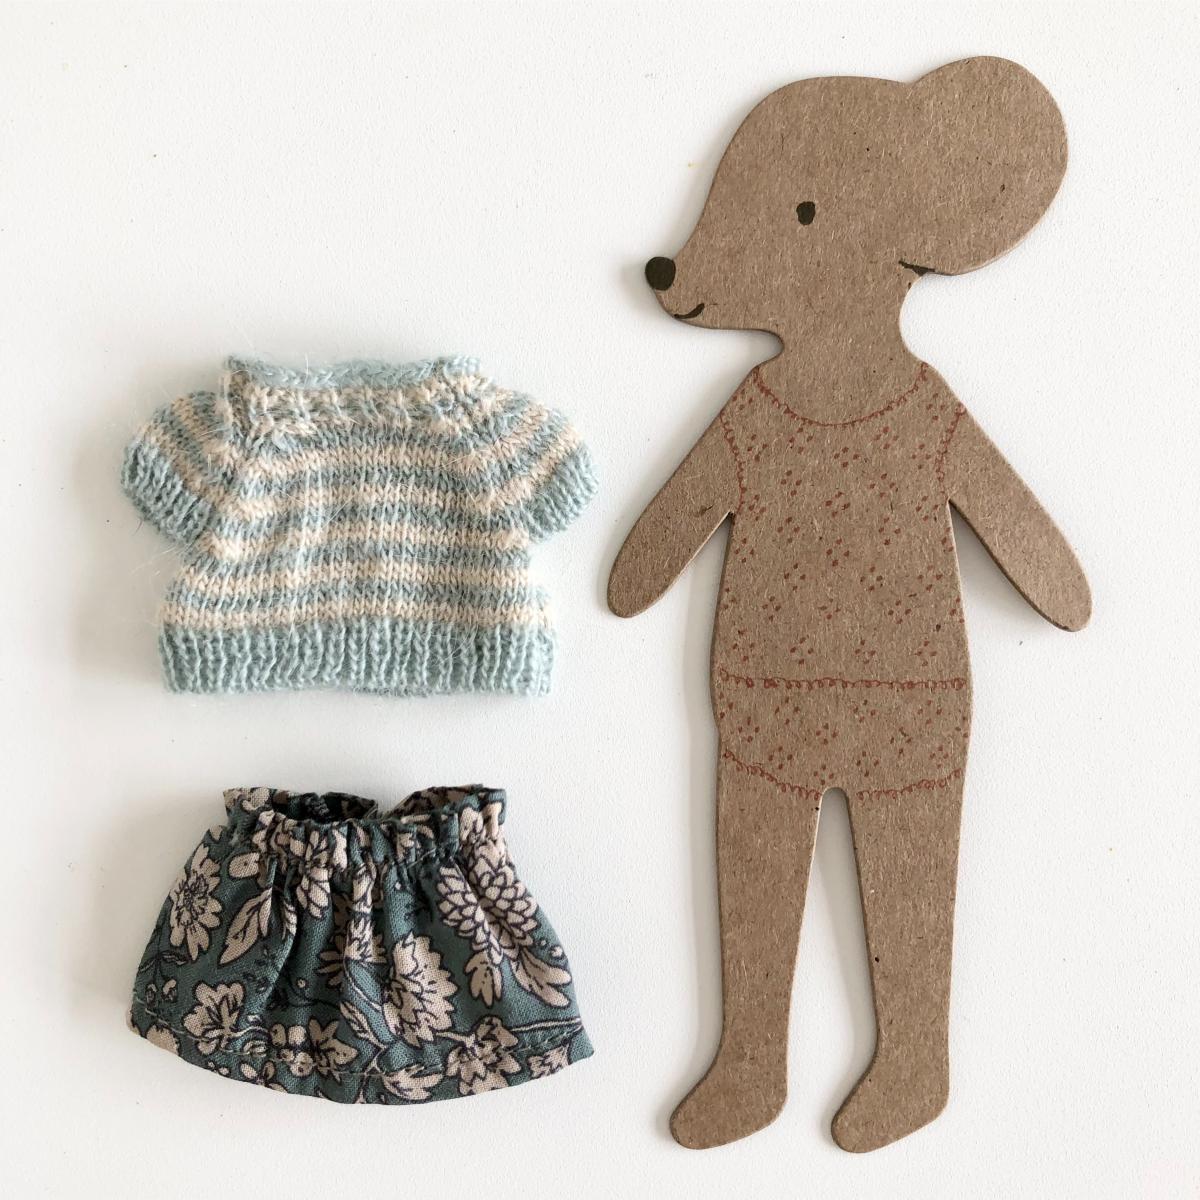 Teddy puppet toy doll knit sweater